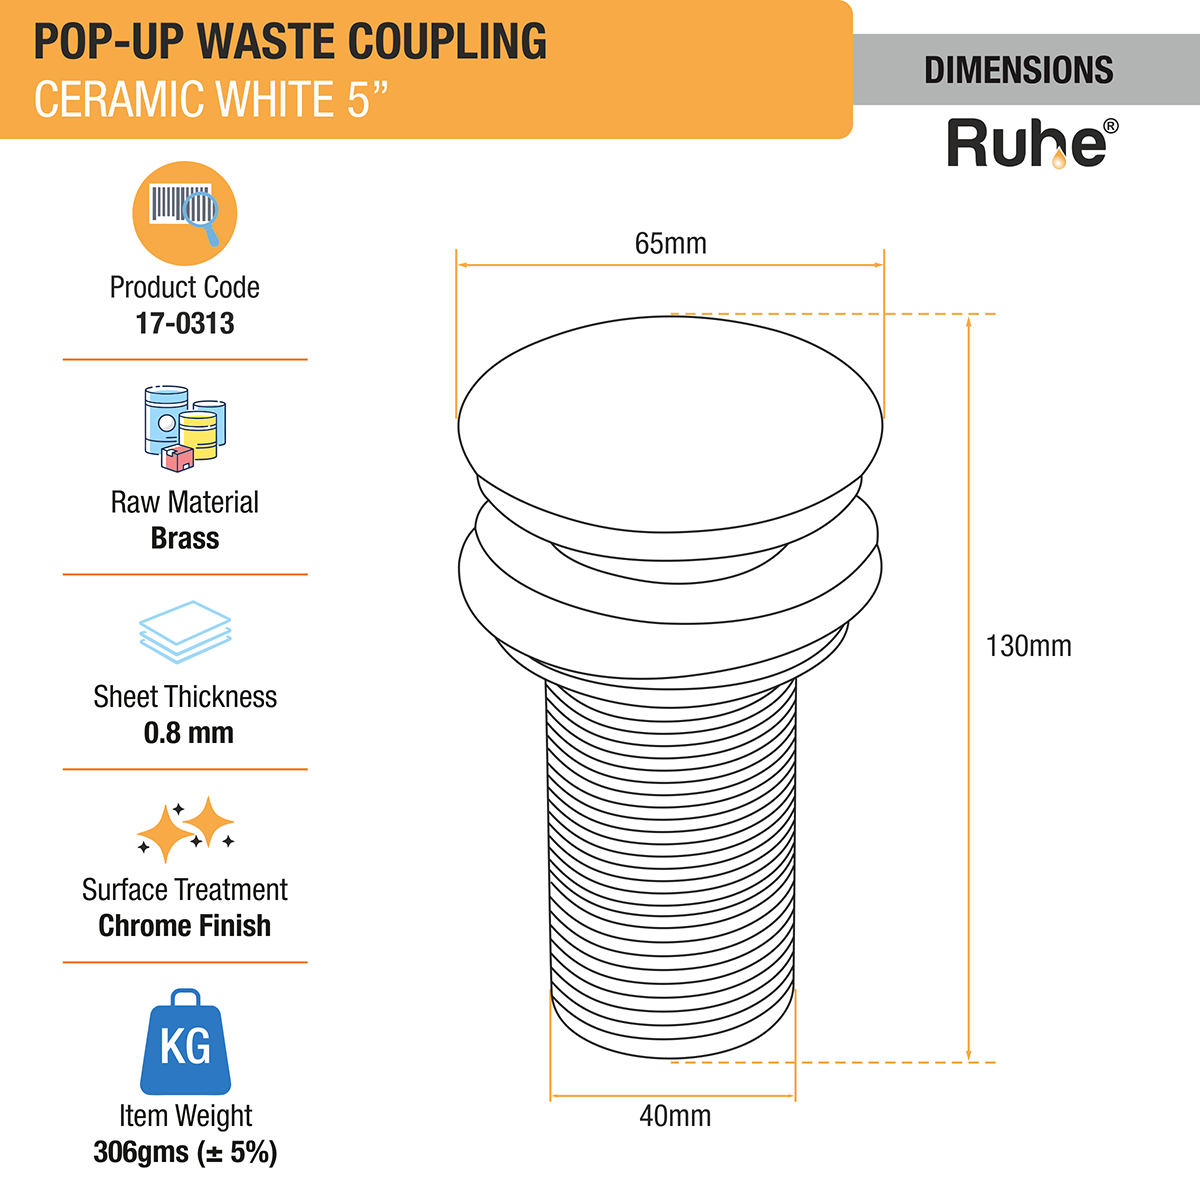 White Ceramic Pop-up Waste Coupling (5 Inches) - by Ruhe